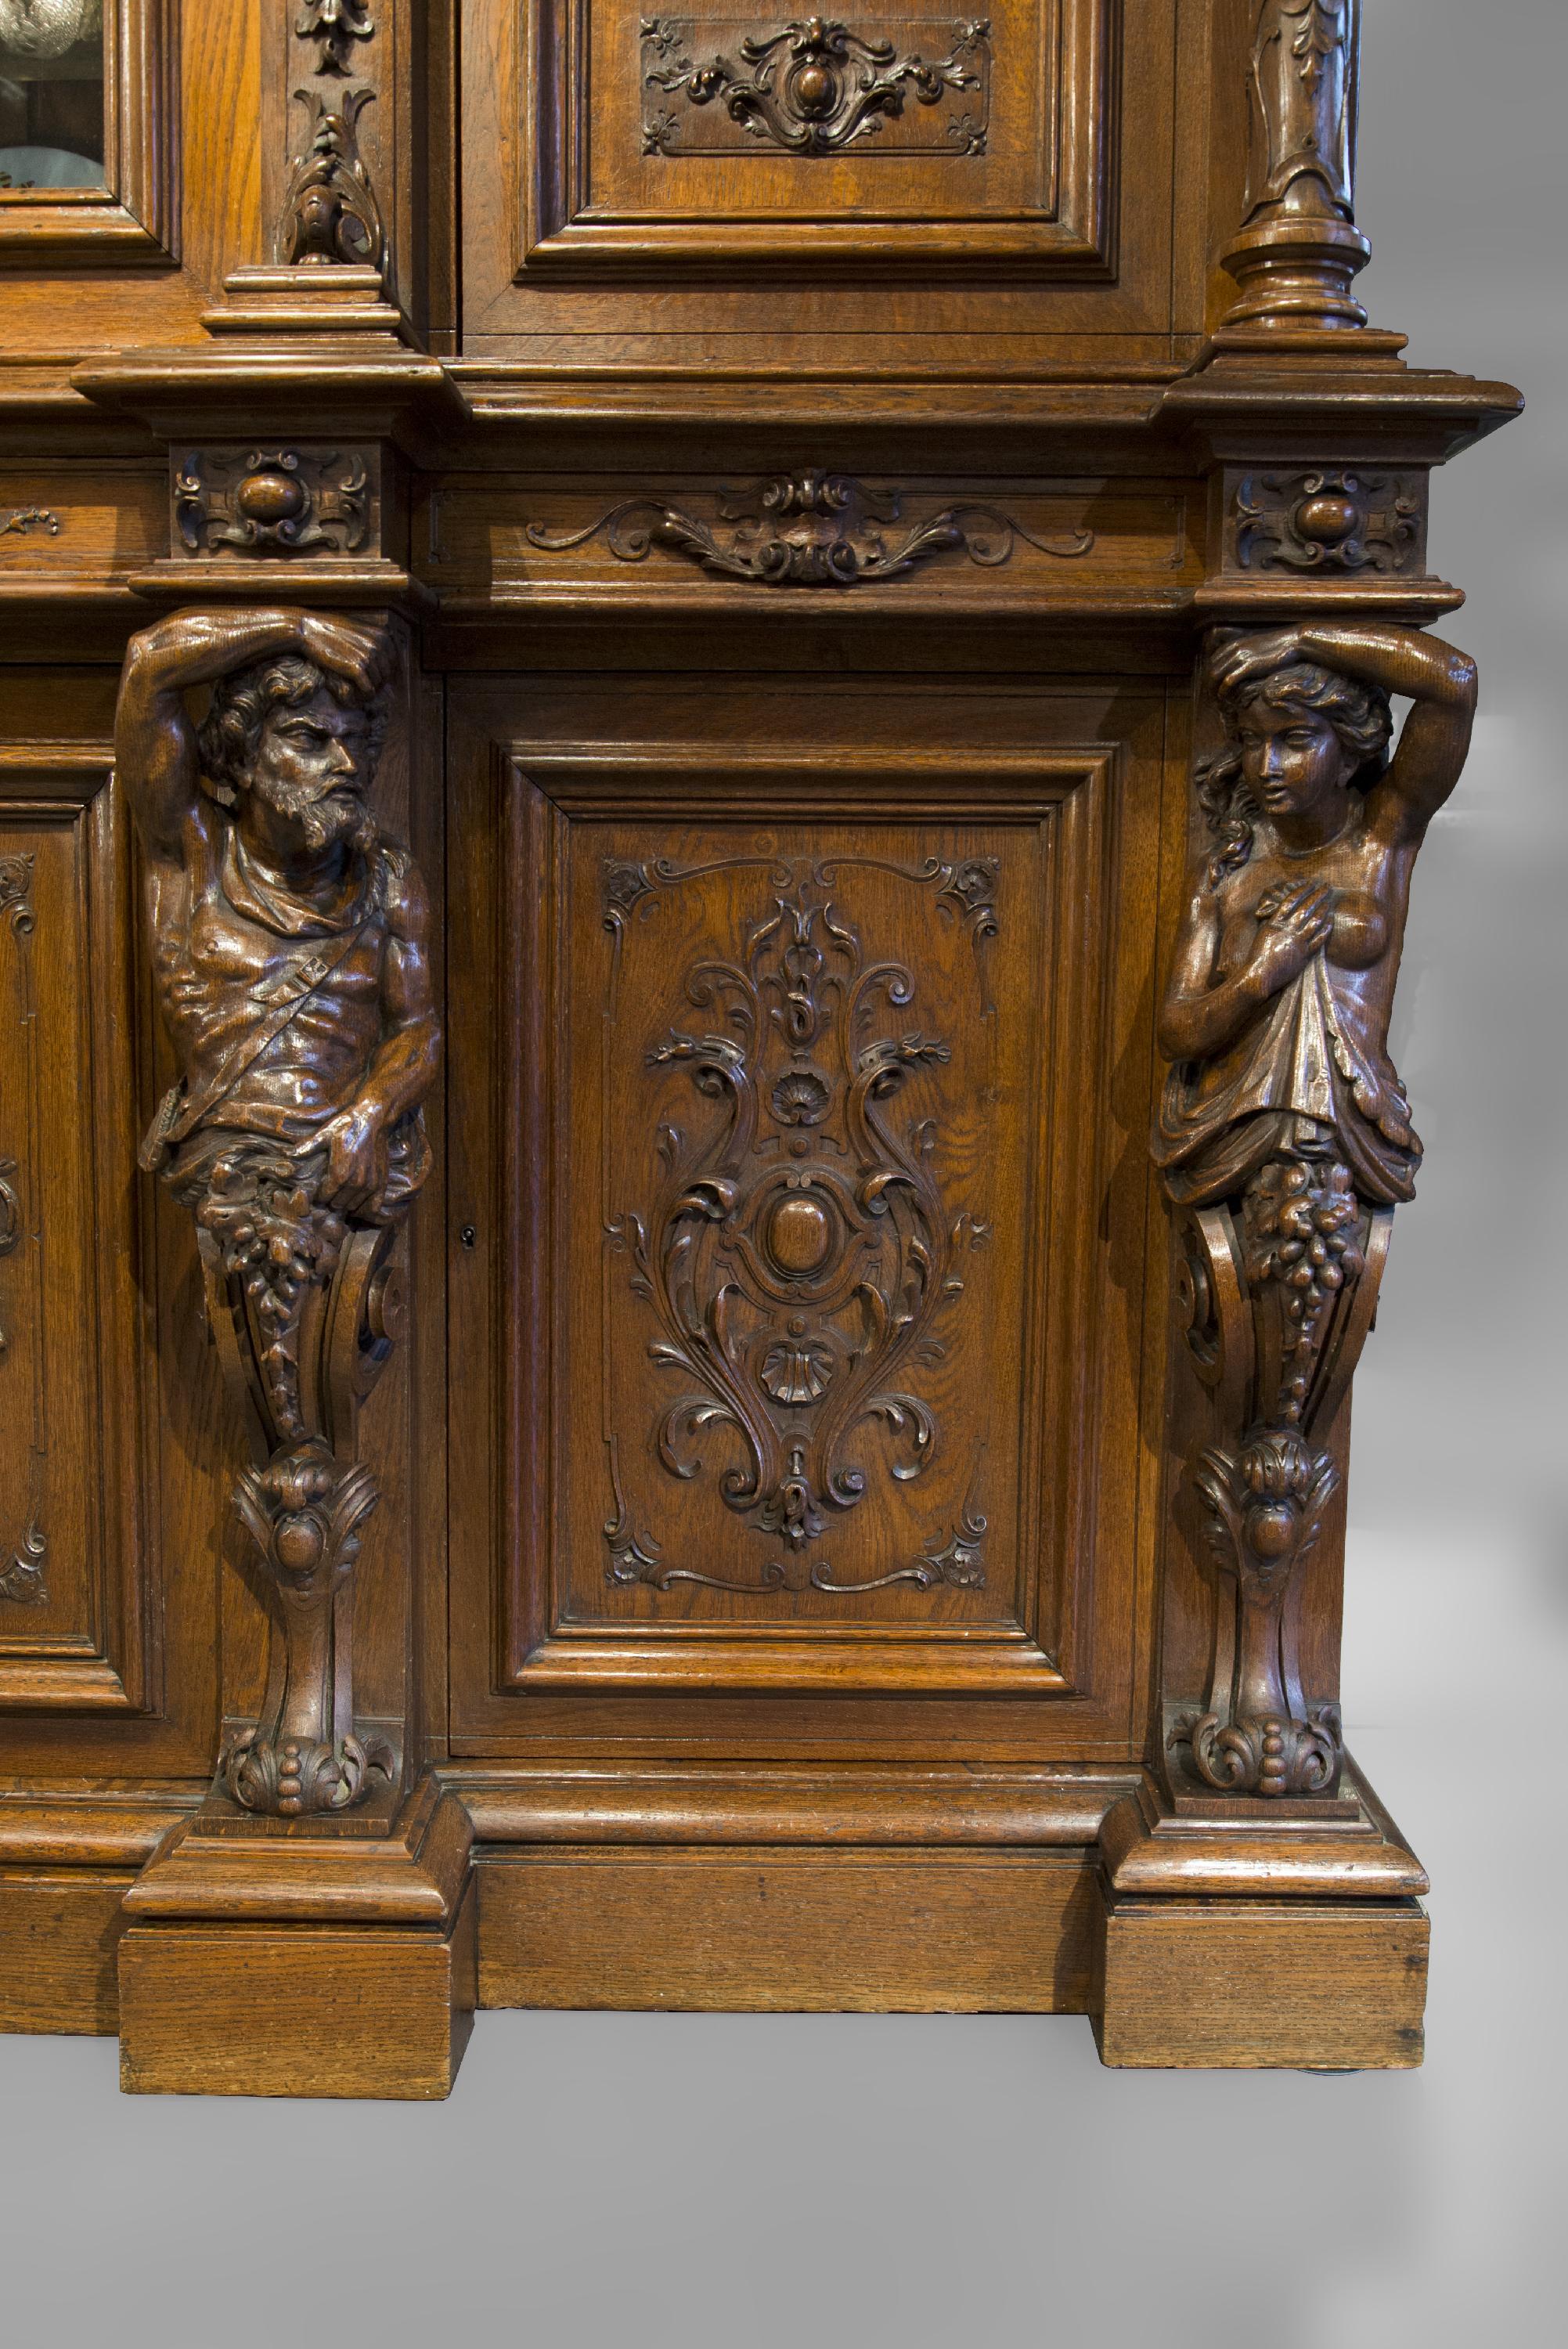 This large Neo-Renaissance style richly carved oak sideboard was made at the end of the 19th century. It is composed of three distinct parts, all decorated with numerous plant arabesques and acanthus leaves. The lower body is adorned with entwined